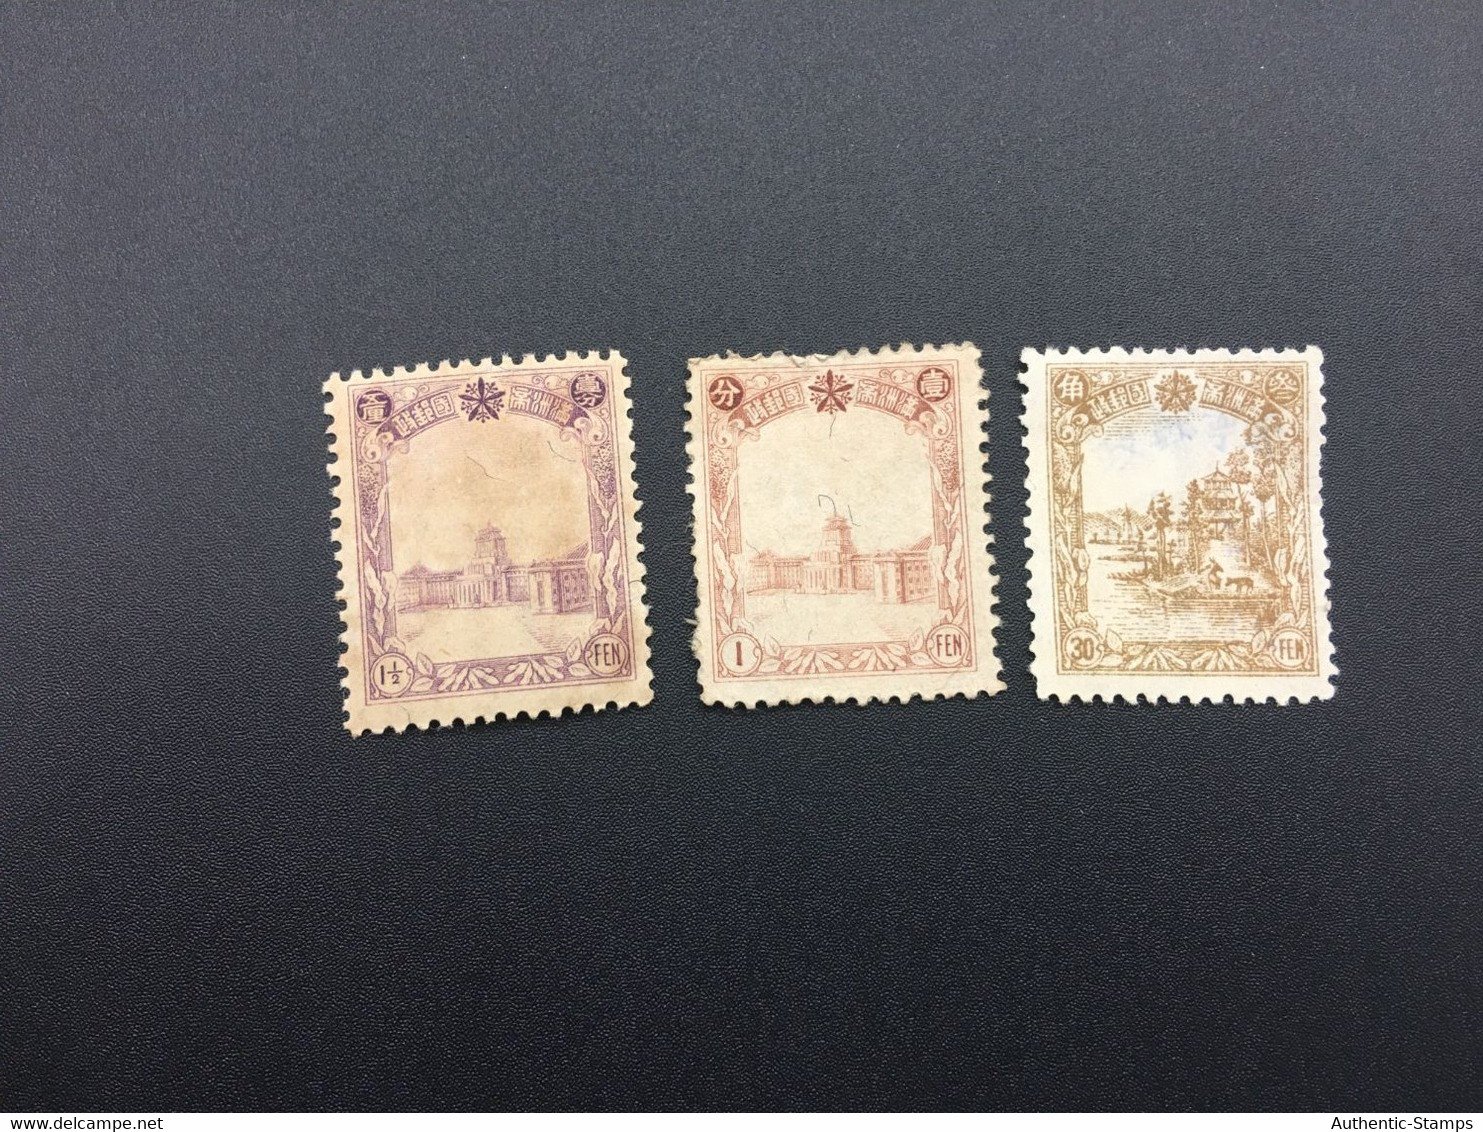 CHINA STAMP,  TIMBRO, STEMPEL,  CINA, CHINE, LIST 8269 - 1932-45 Mandchourie (Mandchoukouo)